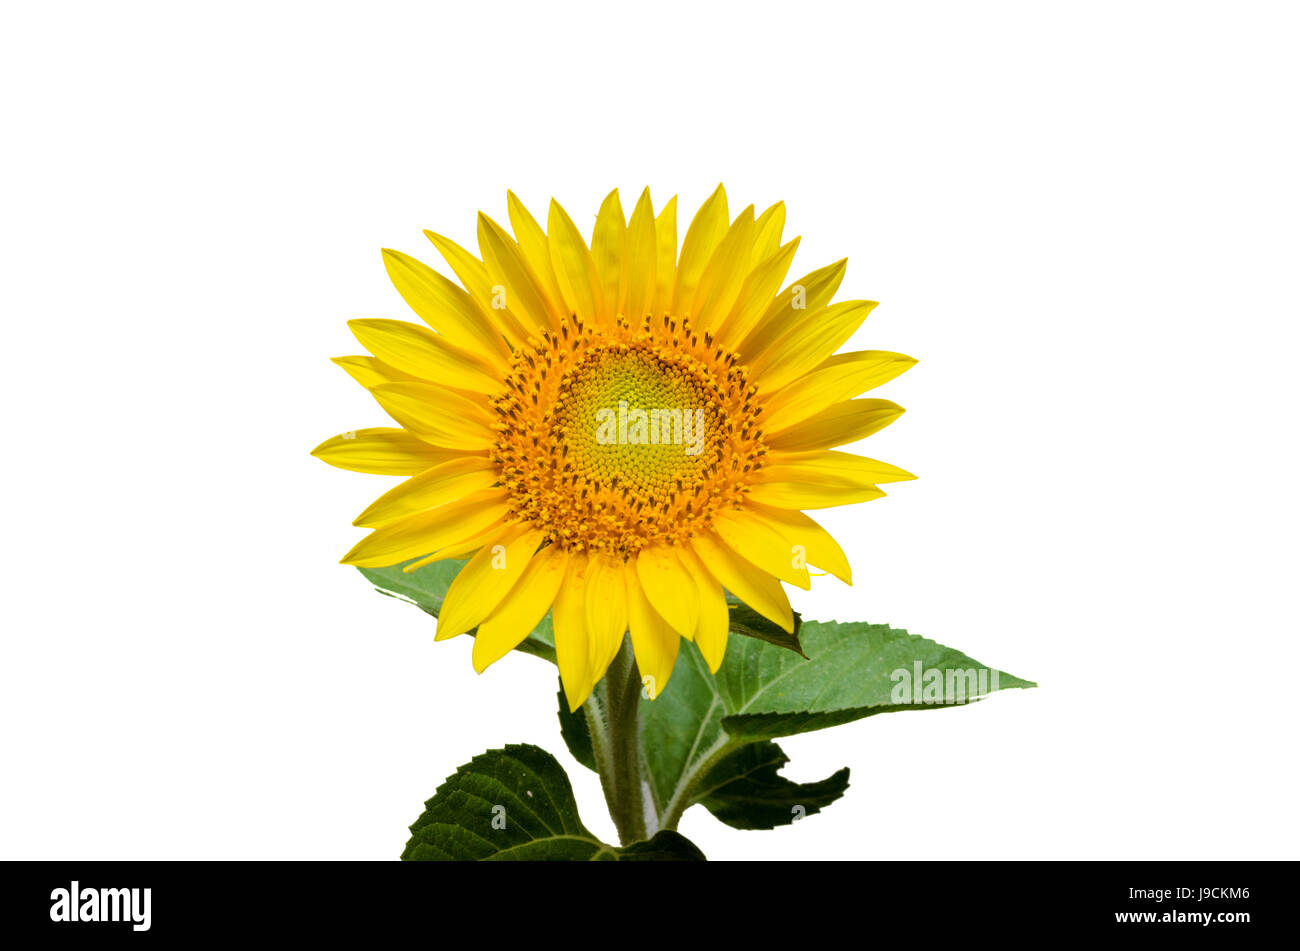 Sunflower isolated on white a background. Stock Photo